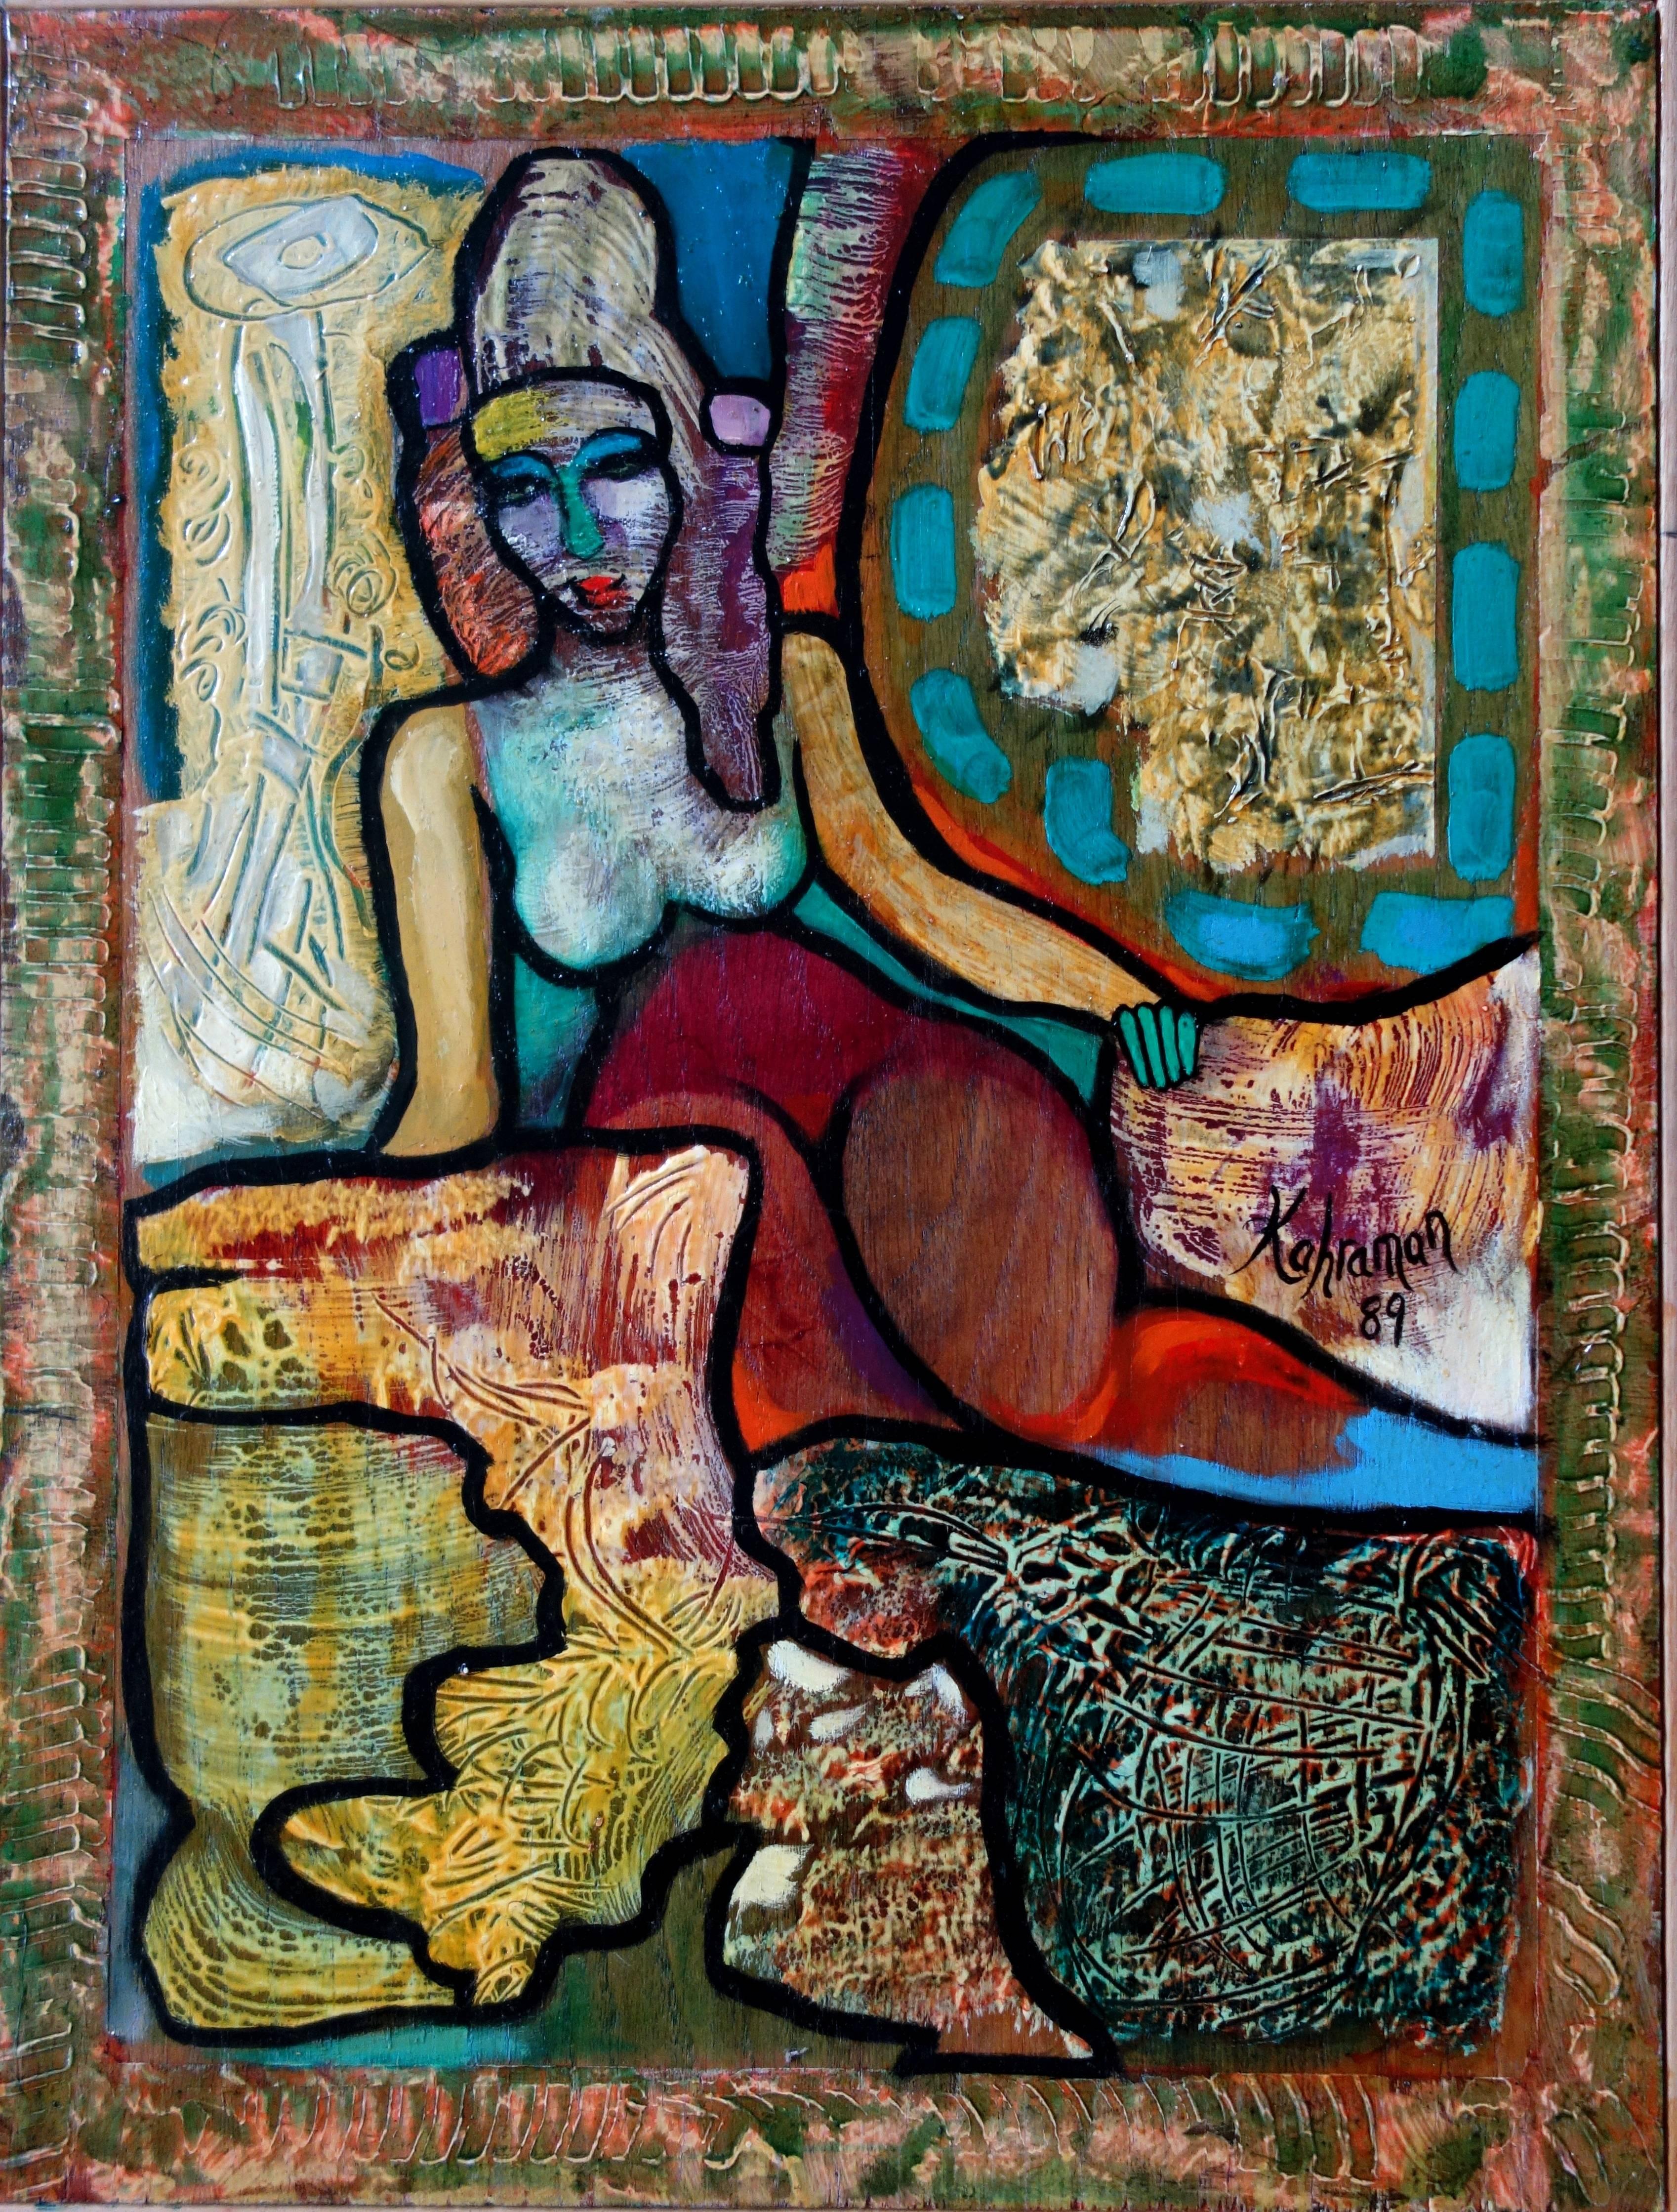 Hassan Ertugrul Kahraman Figurative Painting - Woman with Colorful Pillows - Original painting on panel - Handsigned